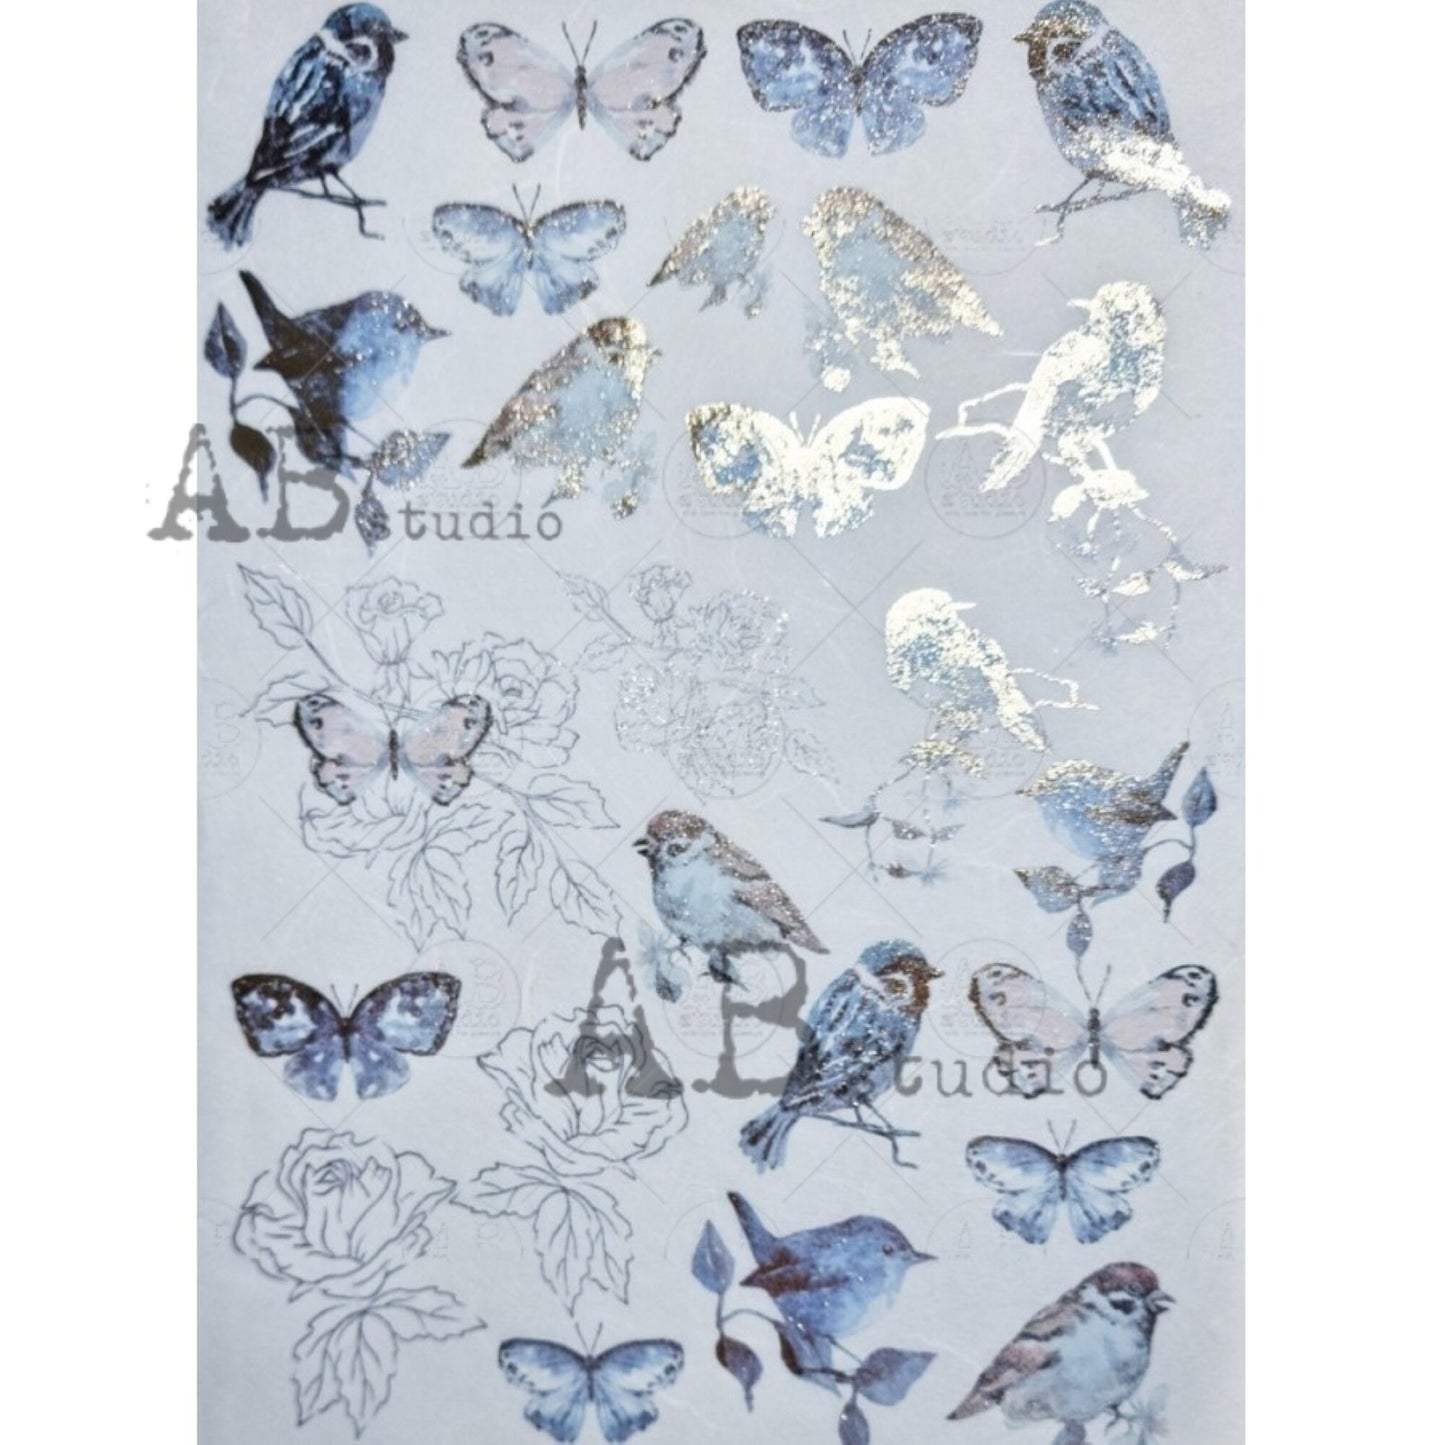 AB Studio Gold Color Gilded Rice Paper for Decoupage, Spring, Blue birds, Roses, Butterflies, A4 1570, 8.27 X 11.69" Imported Poland